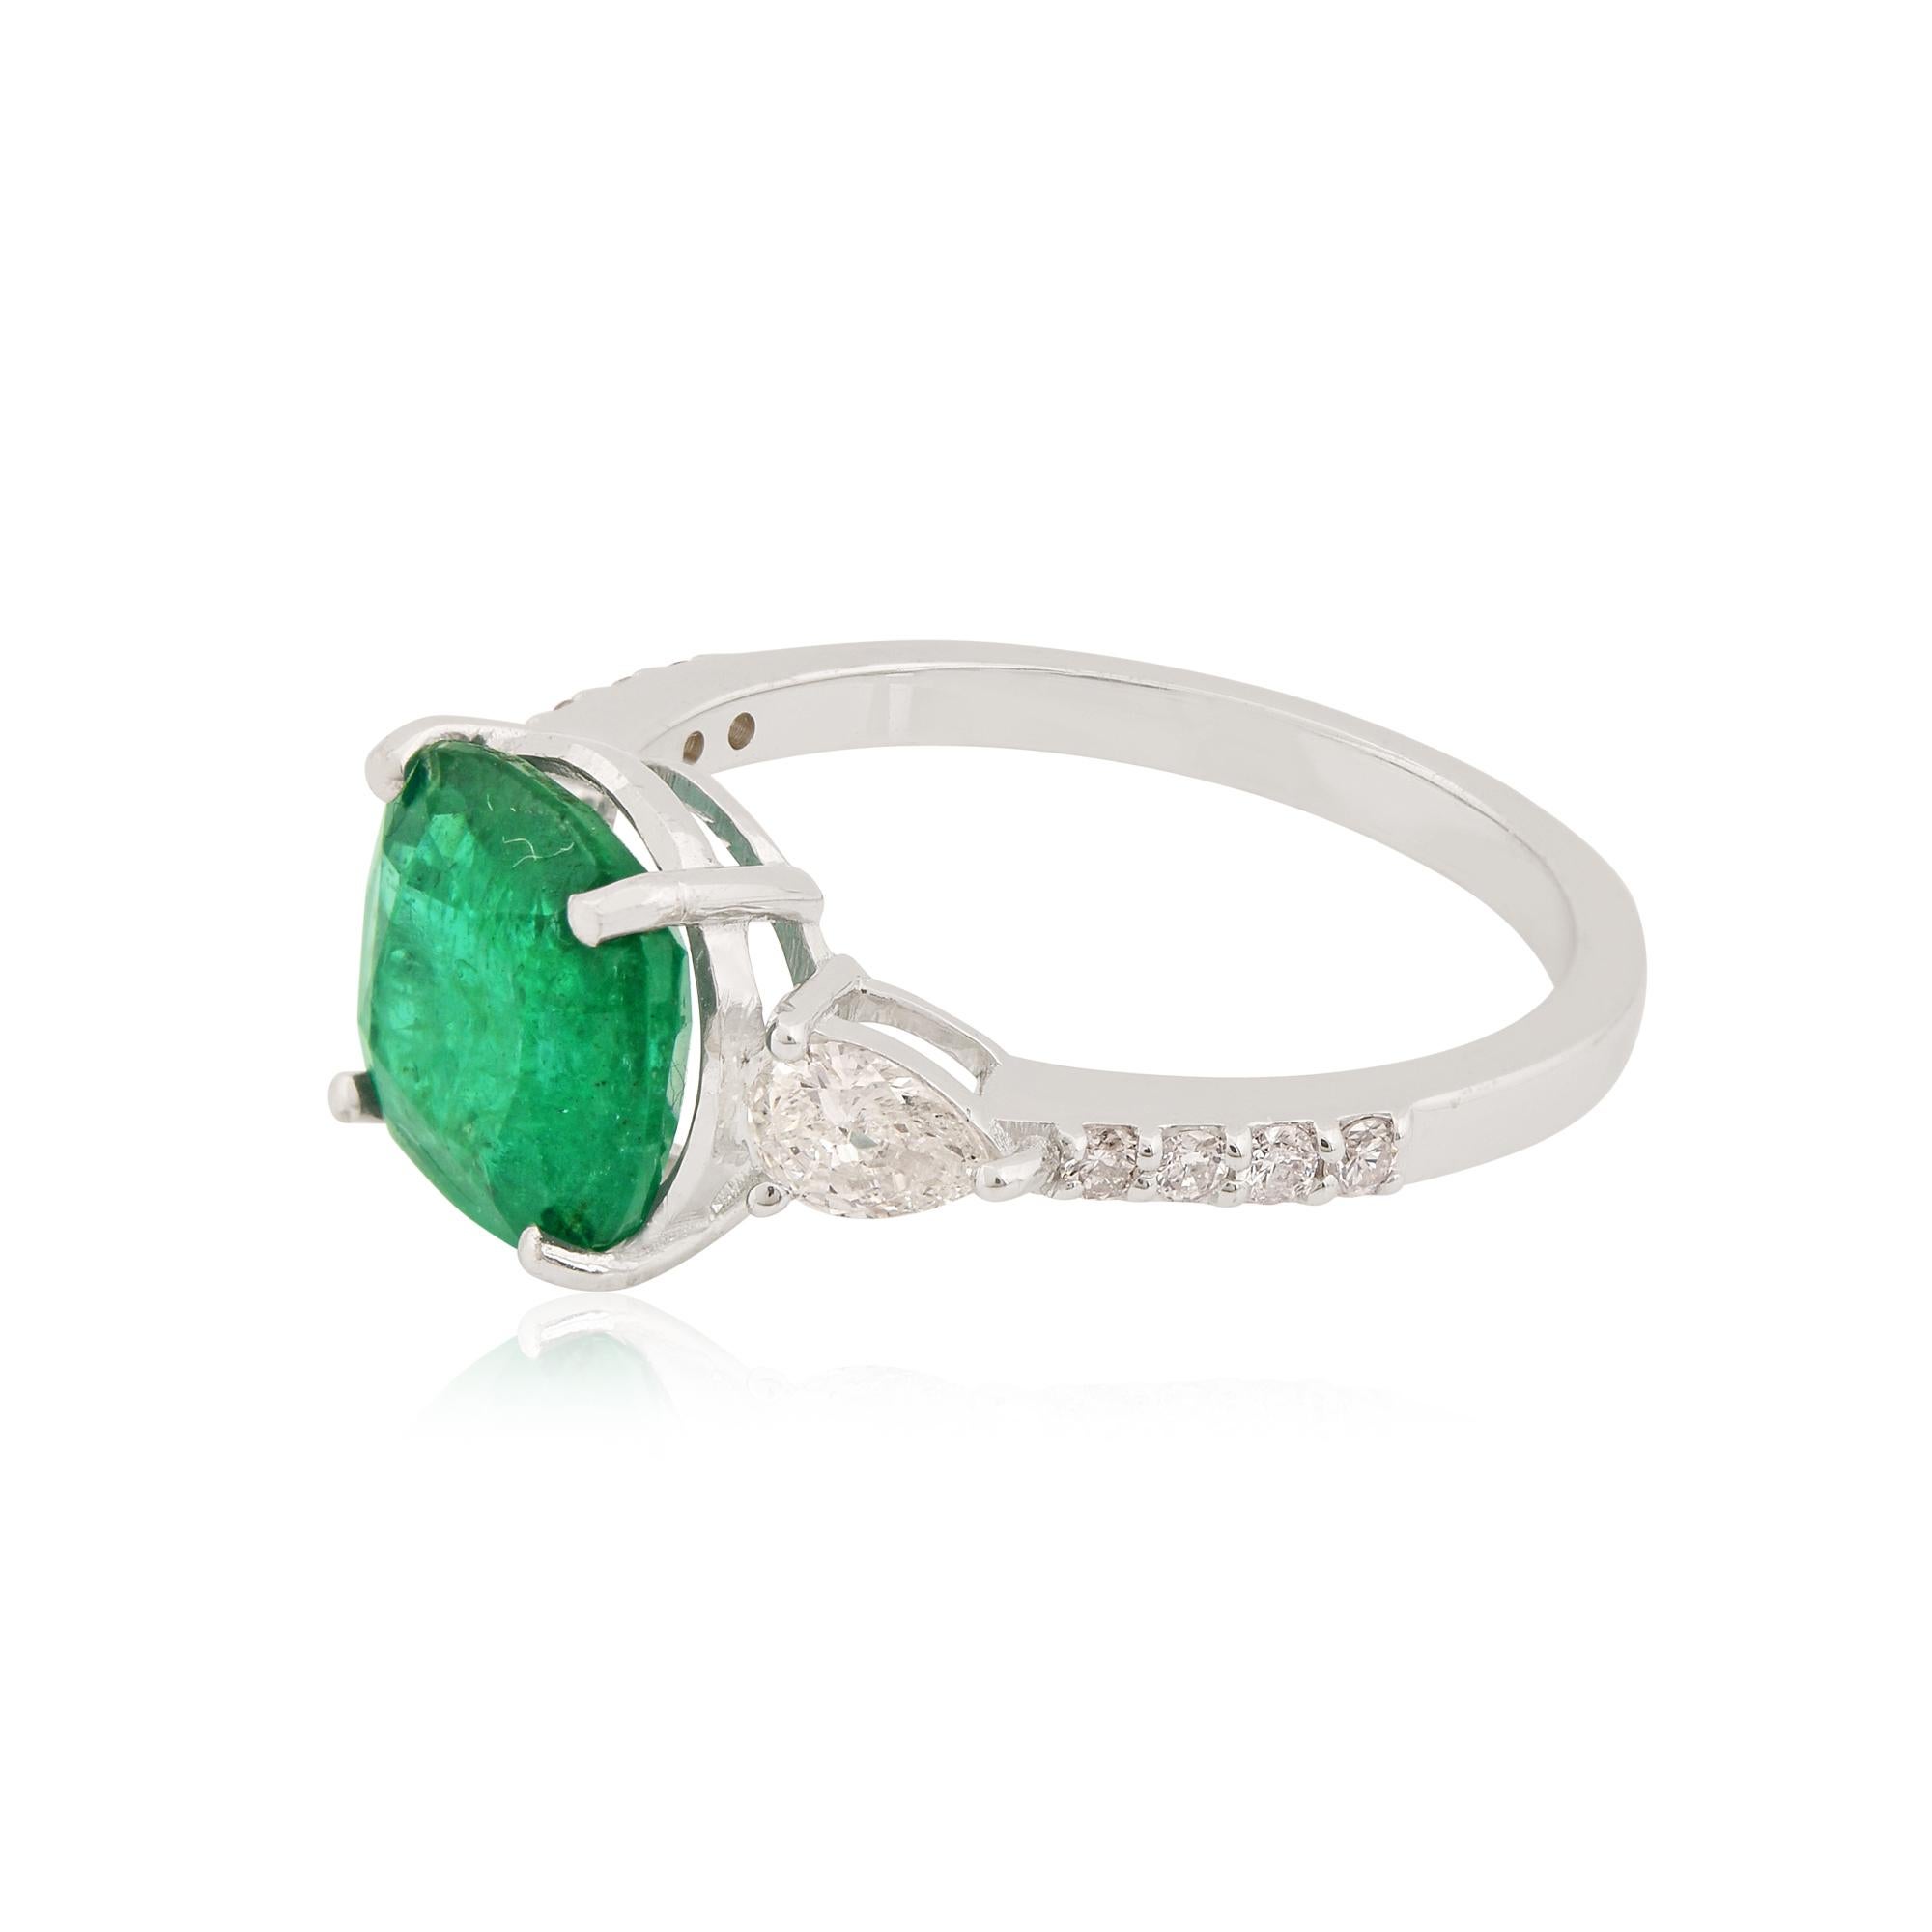 For Sale:  Natural Emerald Cocktail Ring Pear Diamond Solid 18k White Gold Handmade Jewelry 8